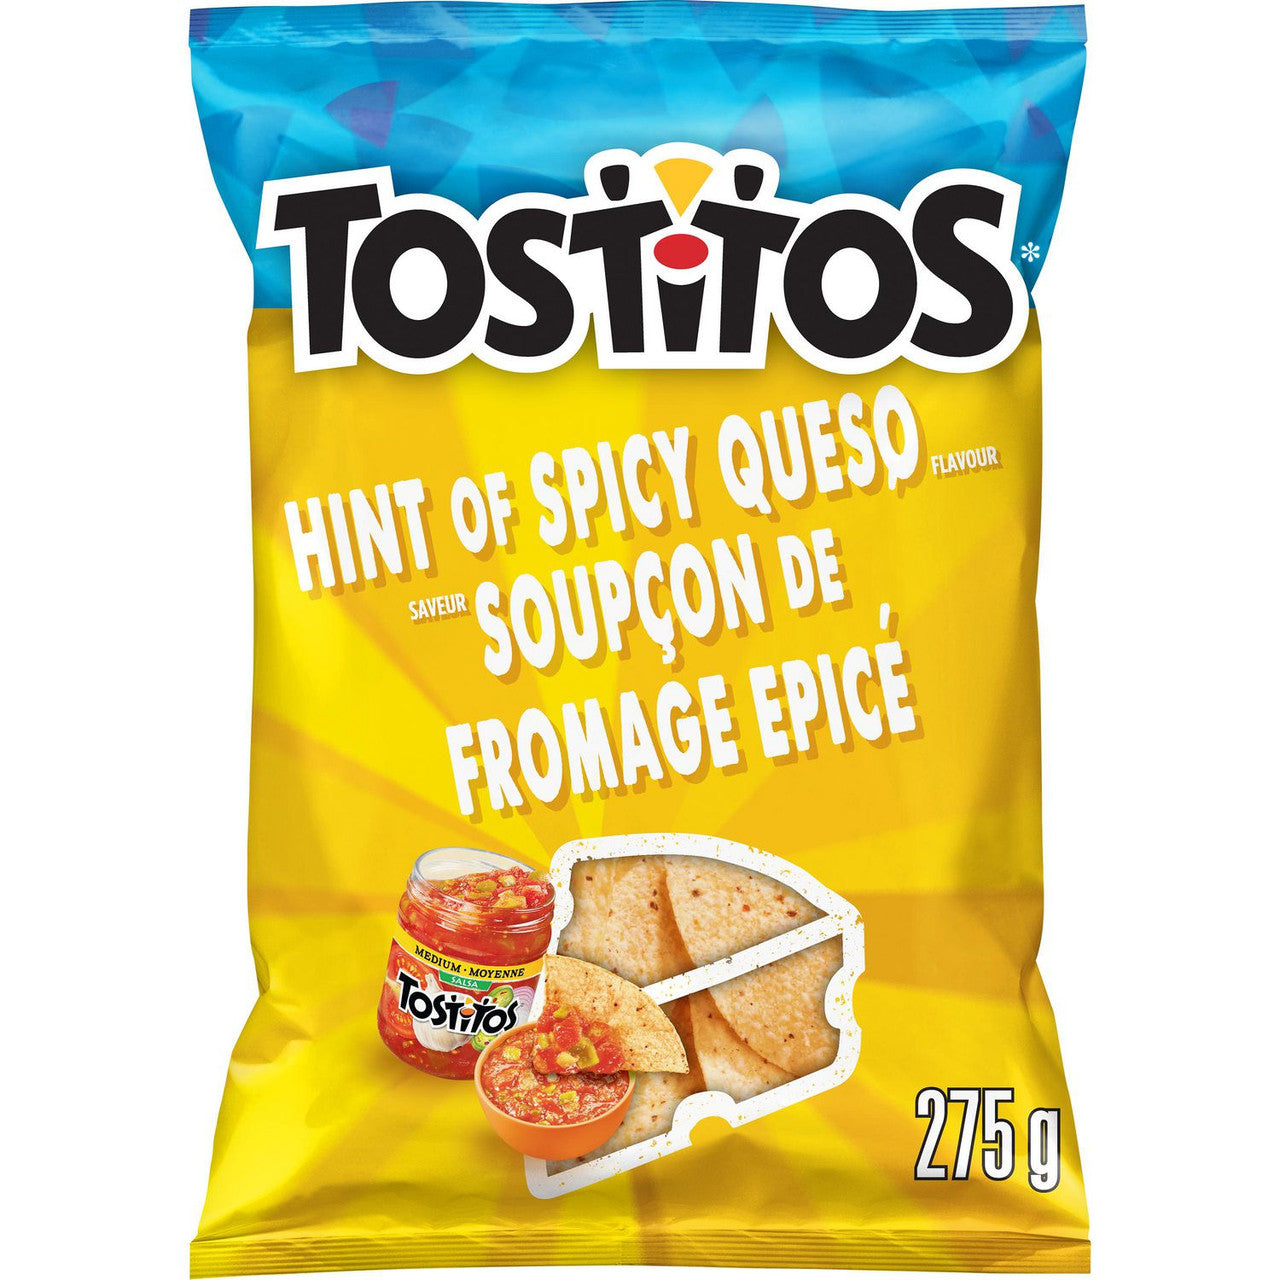 Tostitos Hint of Spicy Queso Flavor Tortilla Chips 275g/9.7 oz., {Imported from Canada}